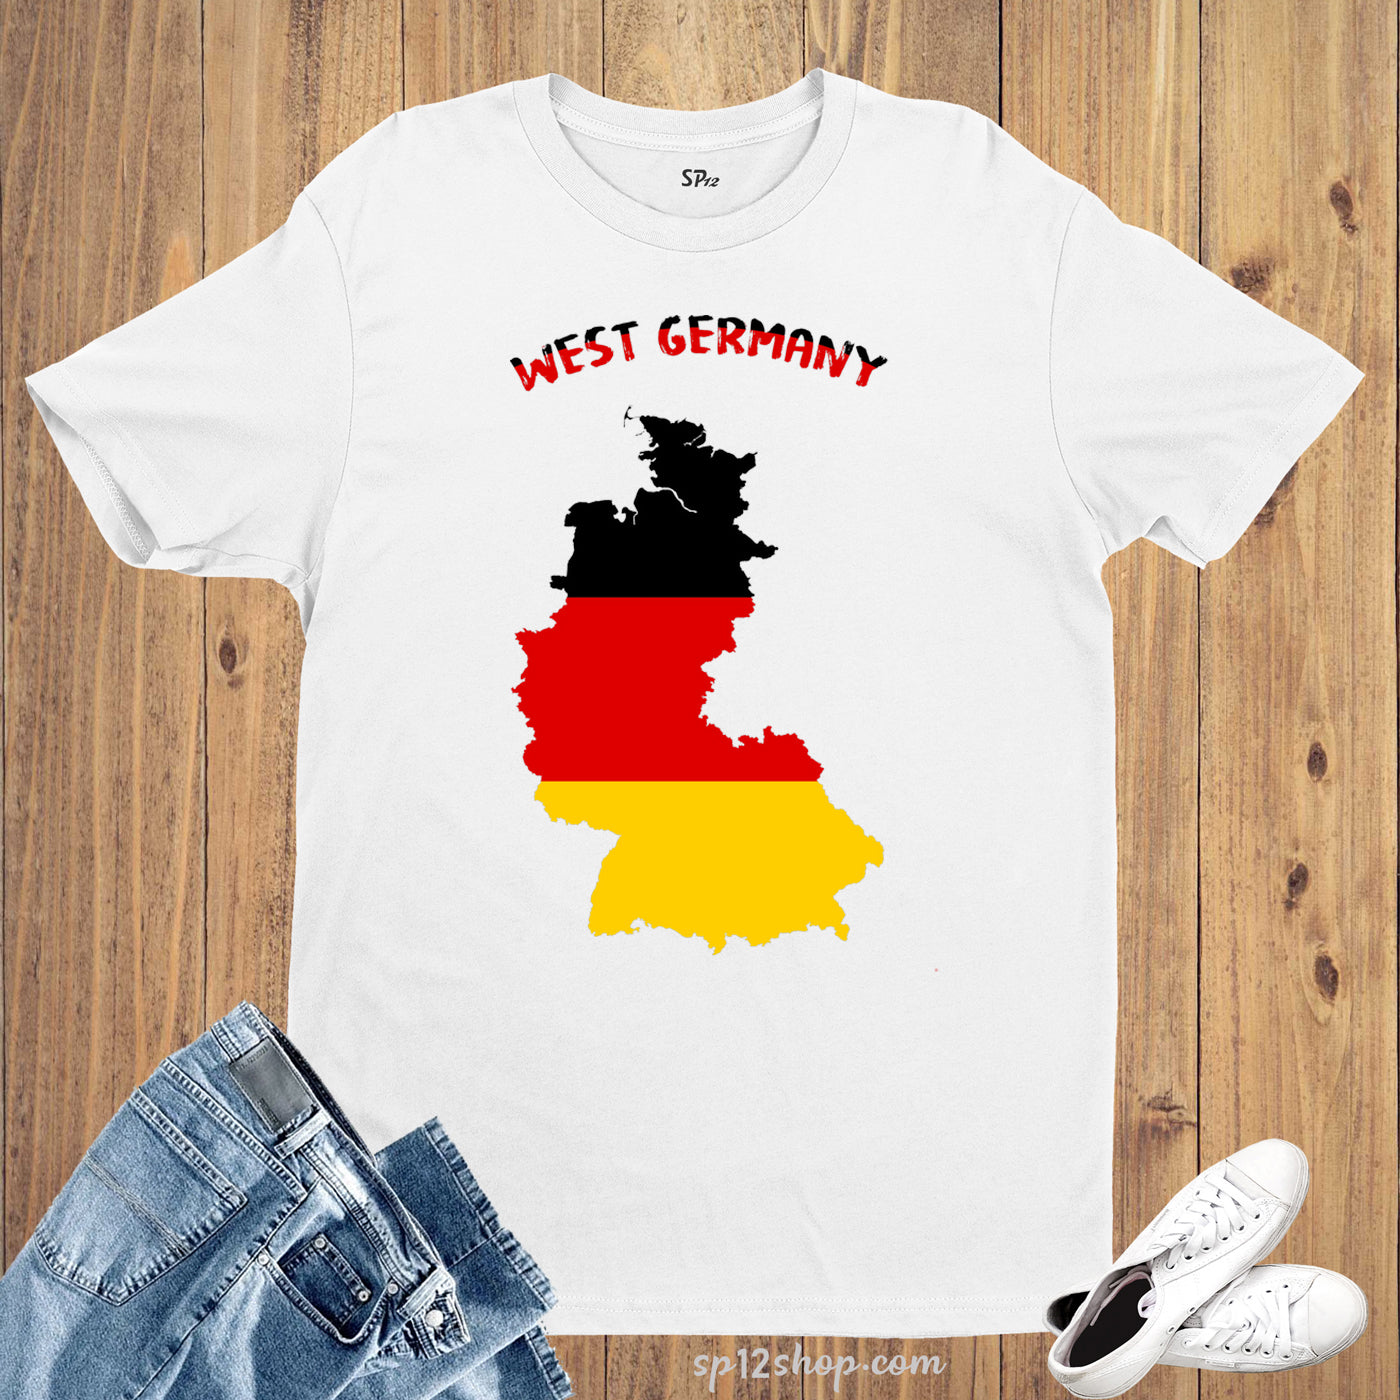 West Germany Flag T Shirt Olympics FIFA World Cup Country Flag Tee Shirt